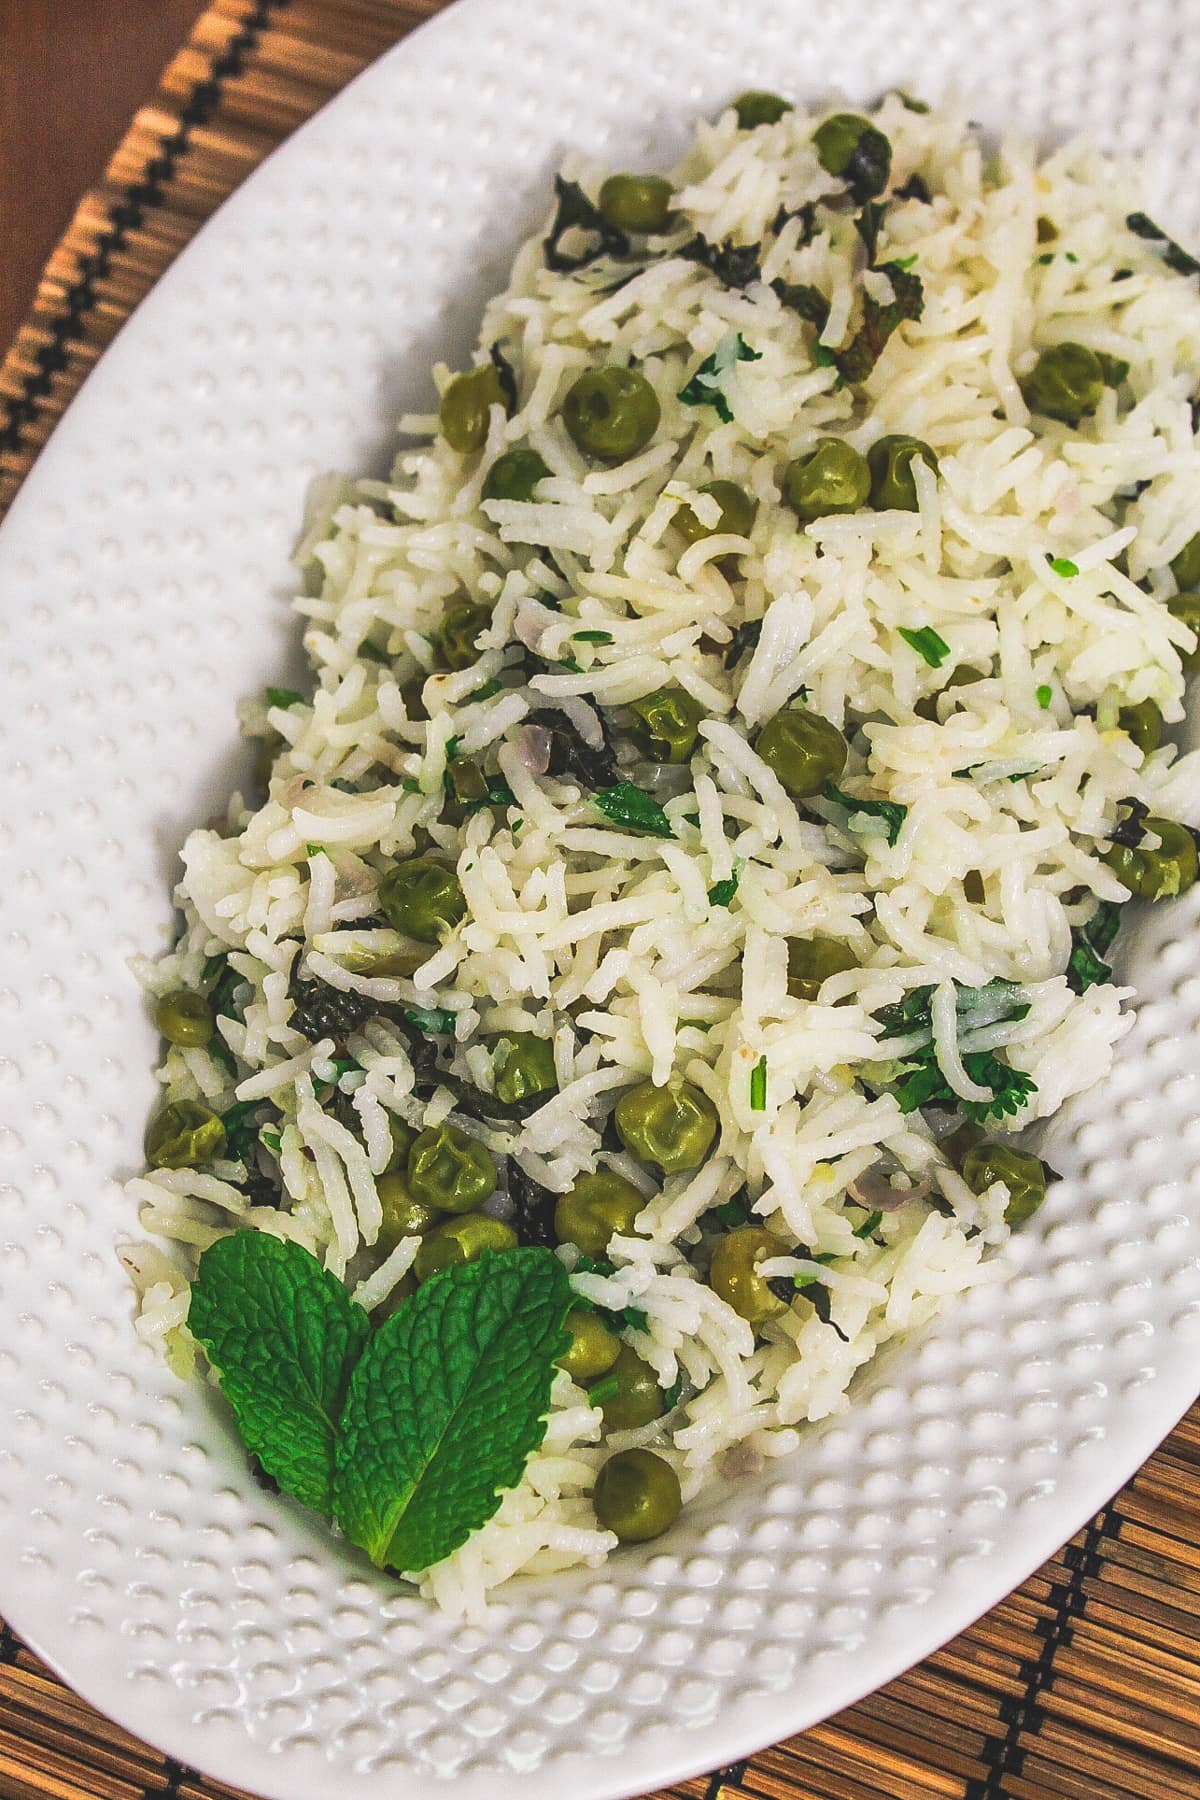 Peas pulao in a plate garnished with mint leaves.